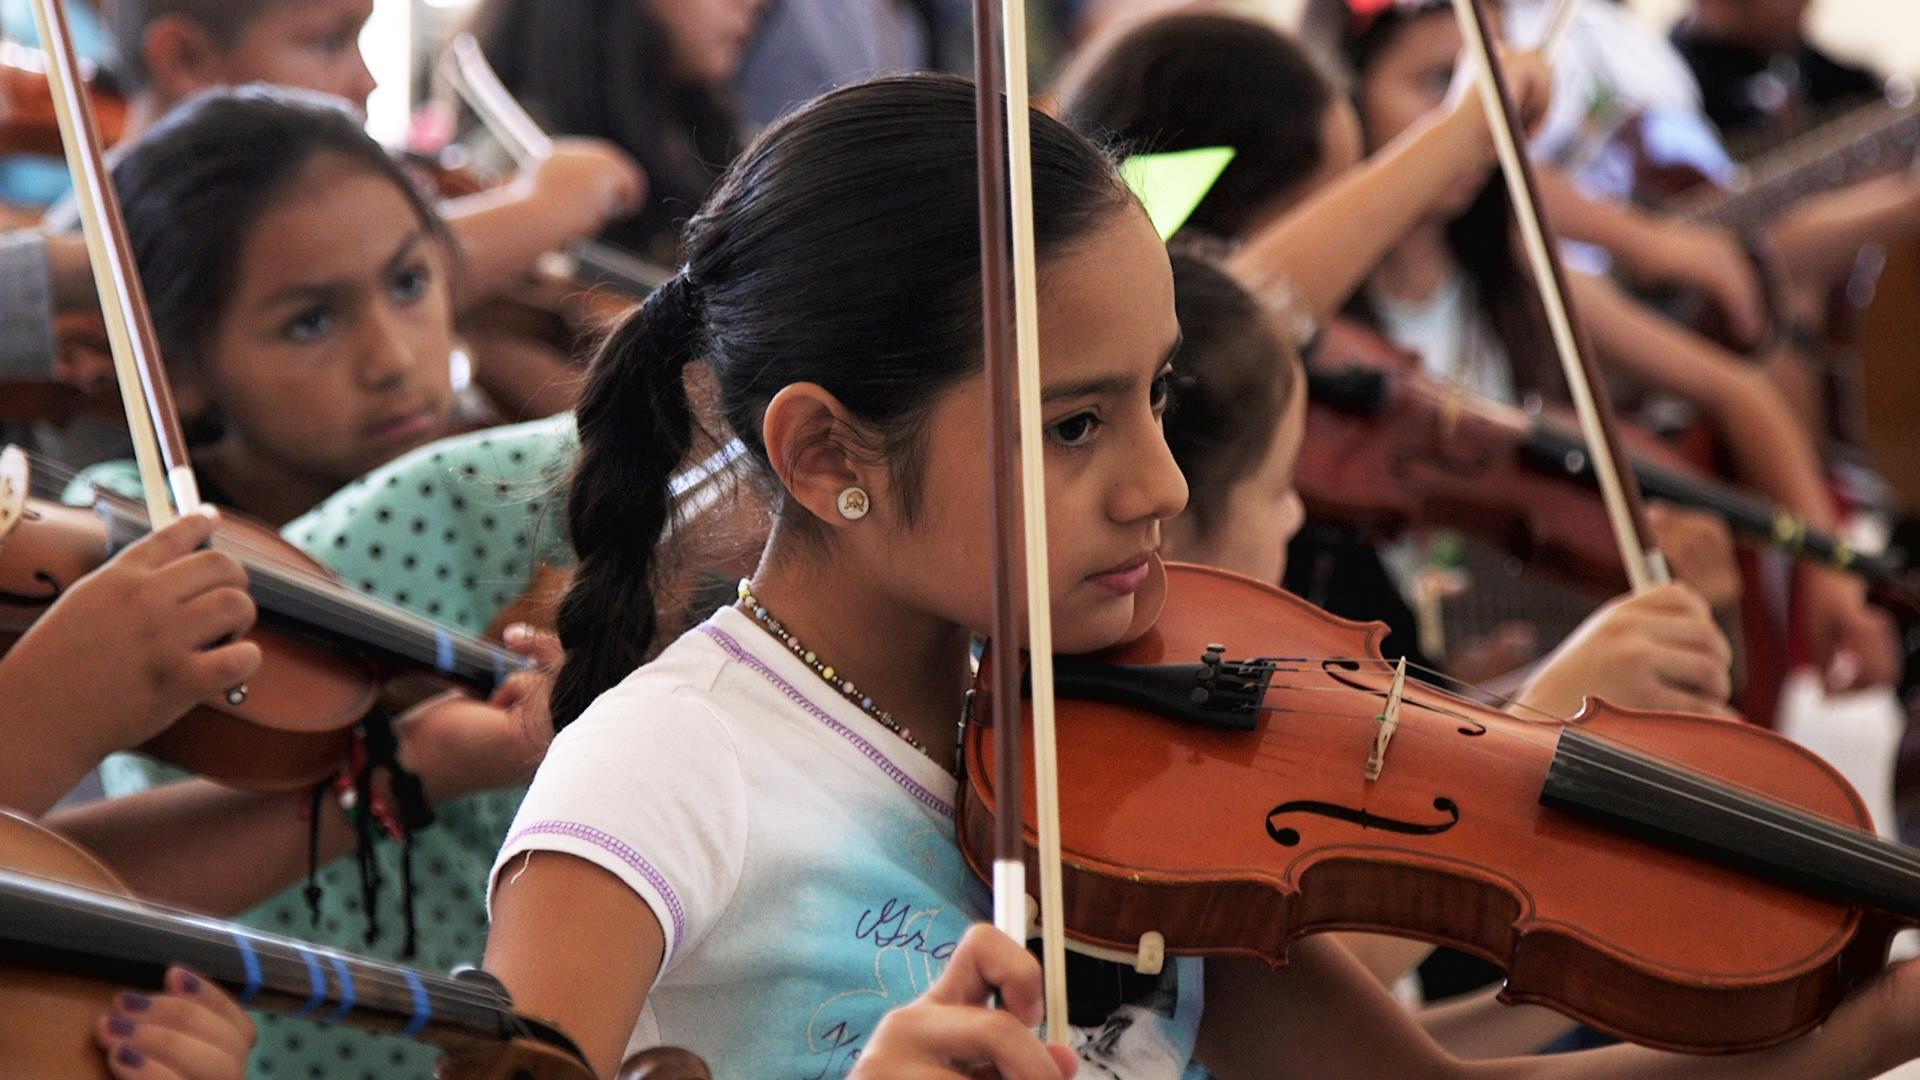 Yuritzi Guerrero practices violin with several other campers.